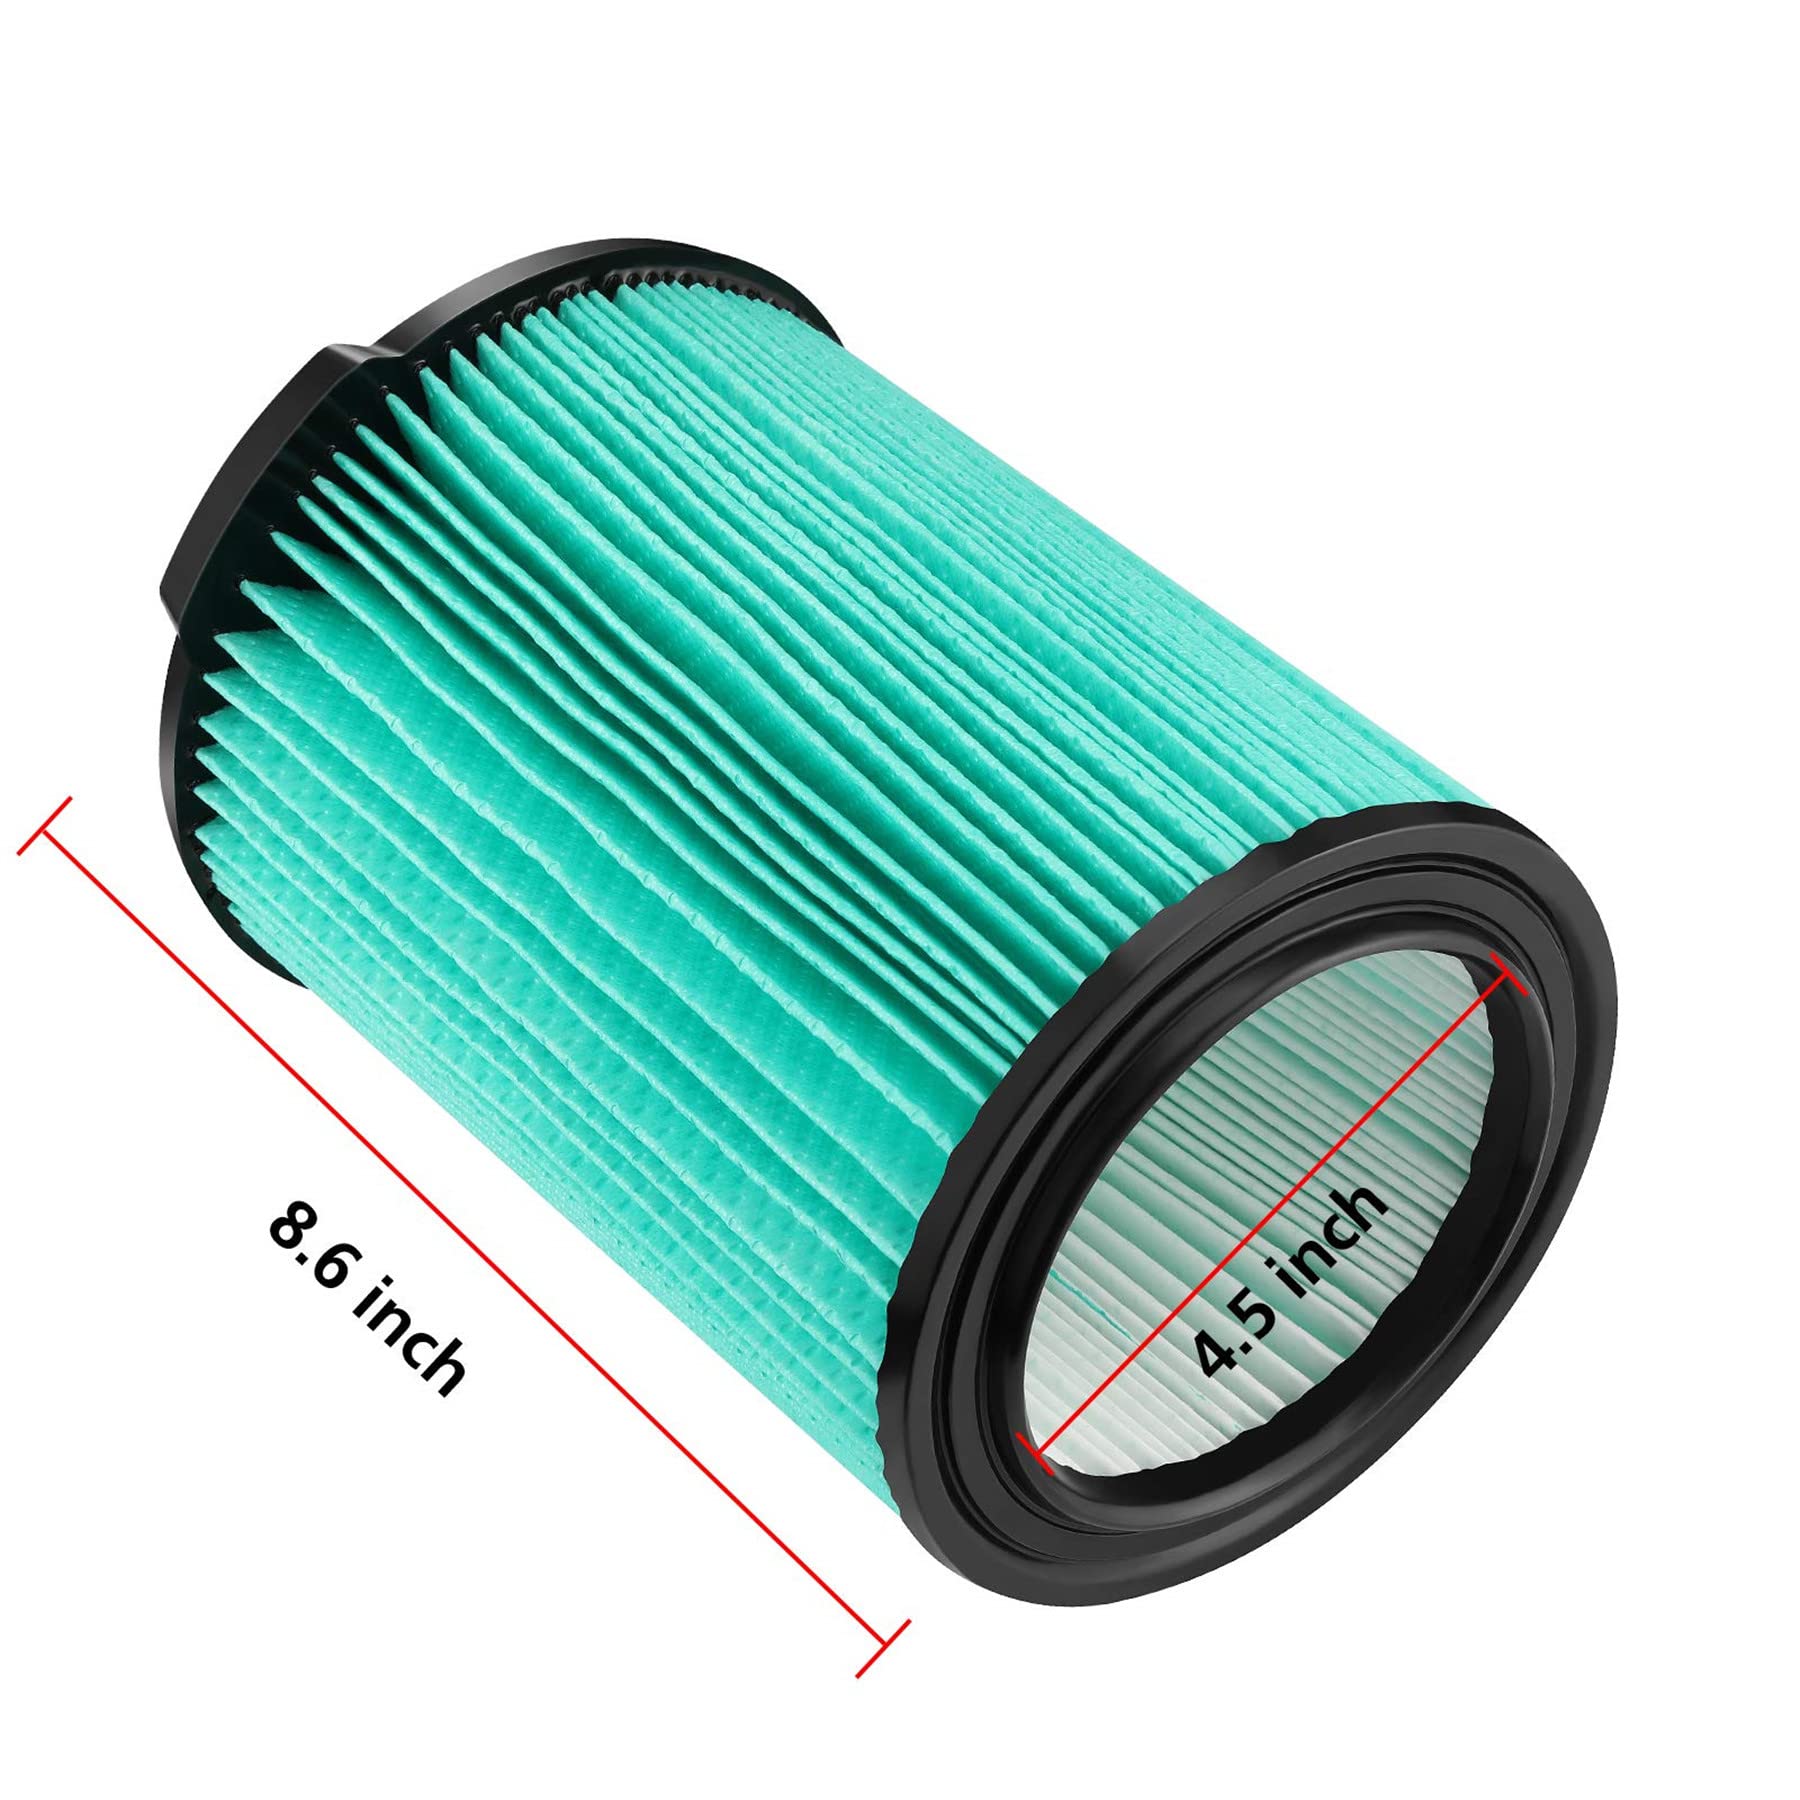 VF6000 5-Layer Pleated Replacement Vacuum Filter Compatible for Ridgid Shop Vac 5-20 Gallon Wet/Dry Vacuums